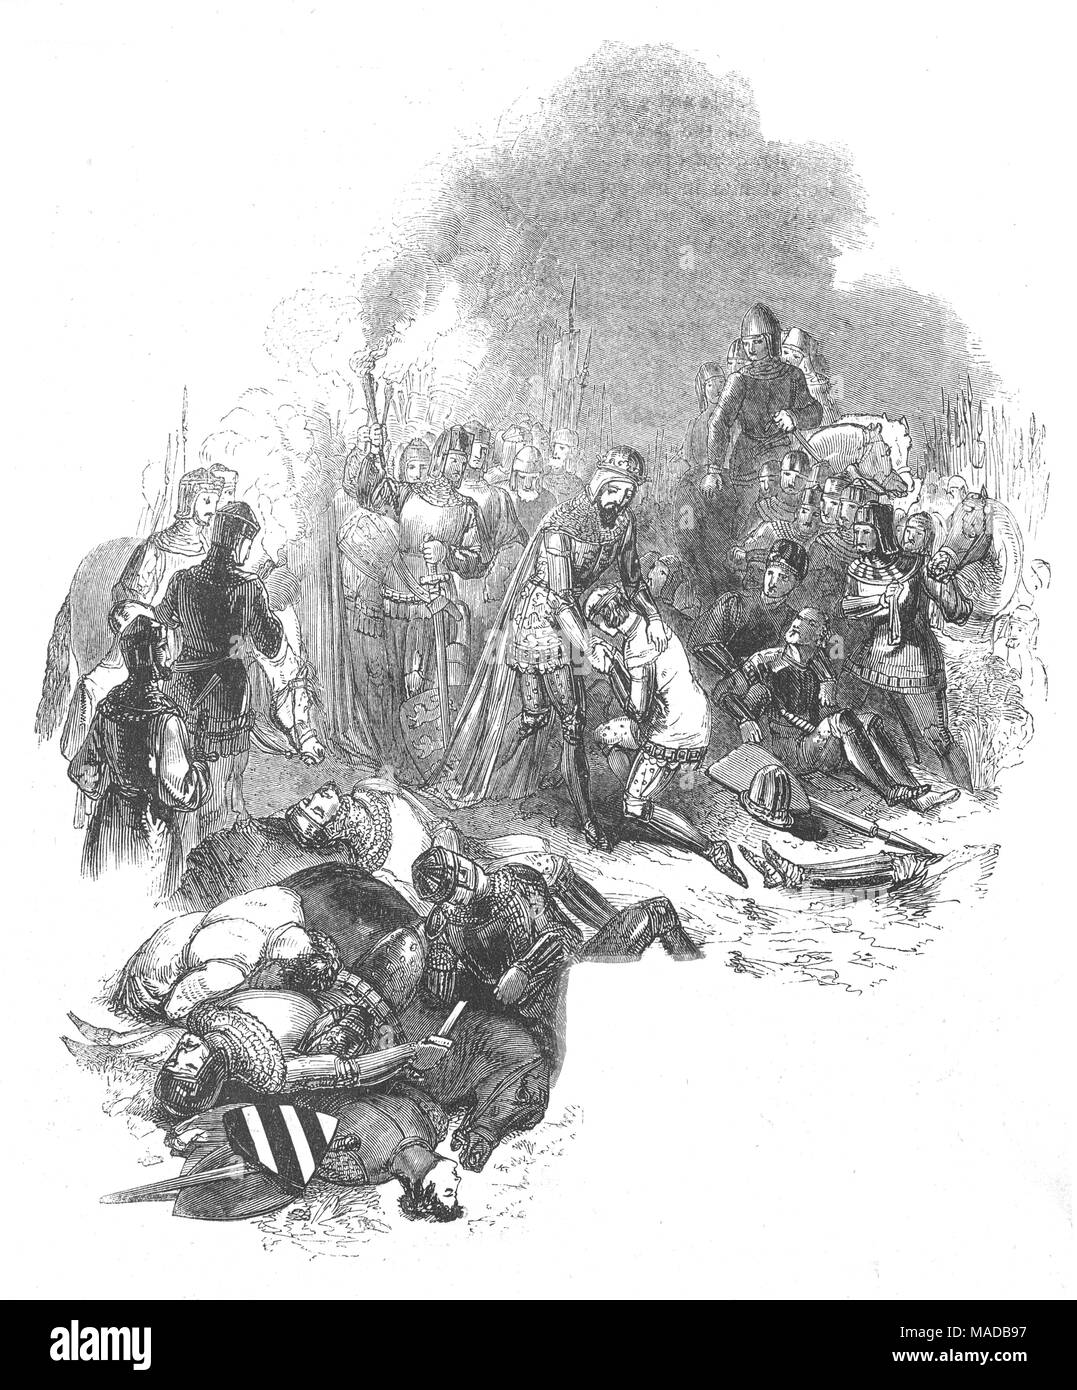 The Battle of Crécy aka, the Battle of Cressy, was fought on 26 August 1346 near Crécy, in northern France. It was an English victory during the Edwardian phase of the Hundred Years' War when an army of English, Welsh, and allied mercenary troops led by Edward III of England, engaged and defeated a much larger army of French, Genoese and Majorcan troops led by Philip VI of France. With the later battles of Poitiers in 1356, and Agincourt in 1415, it was the first of three famous English successes during the conflict. Stock Photo